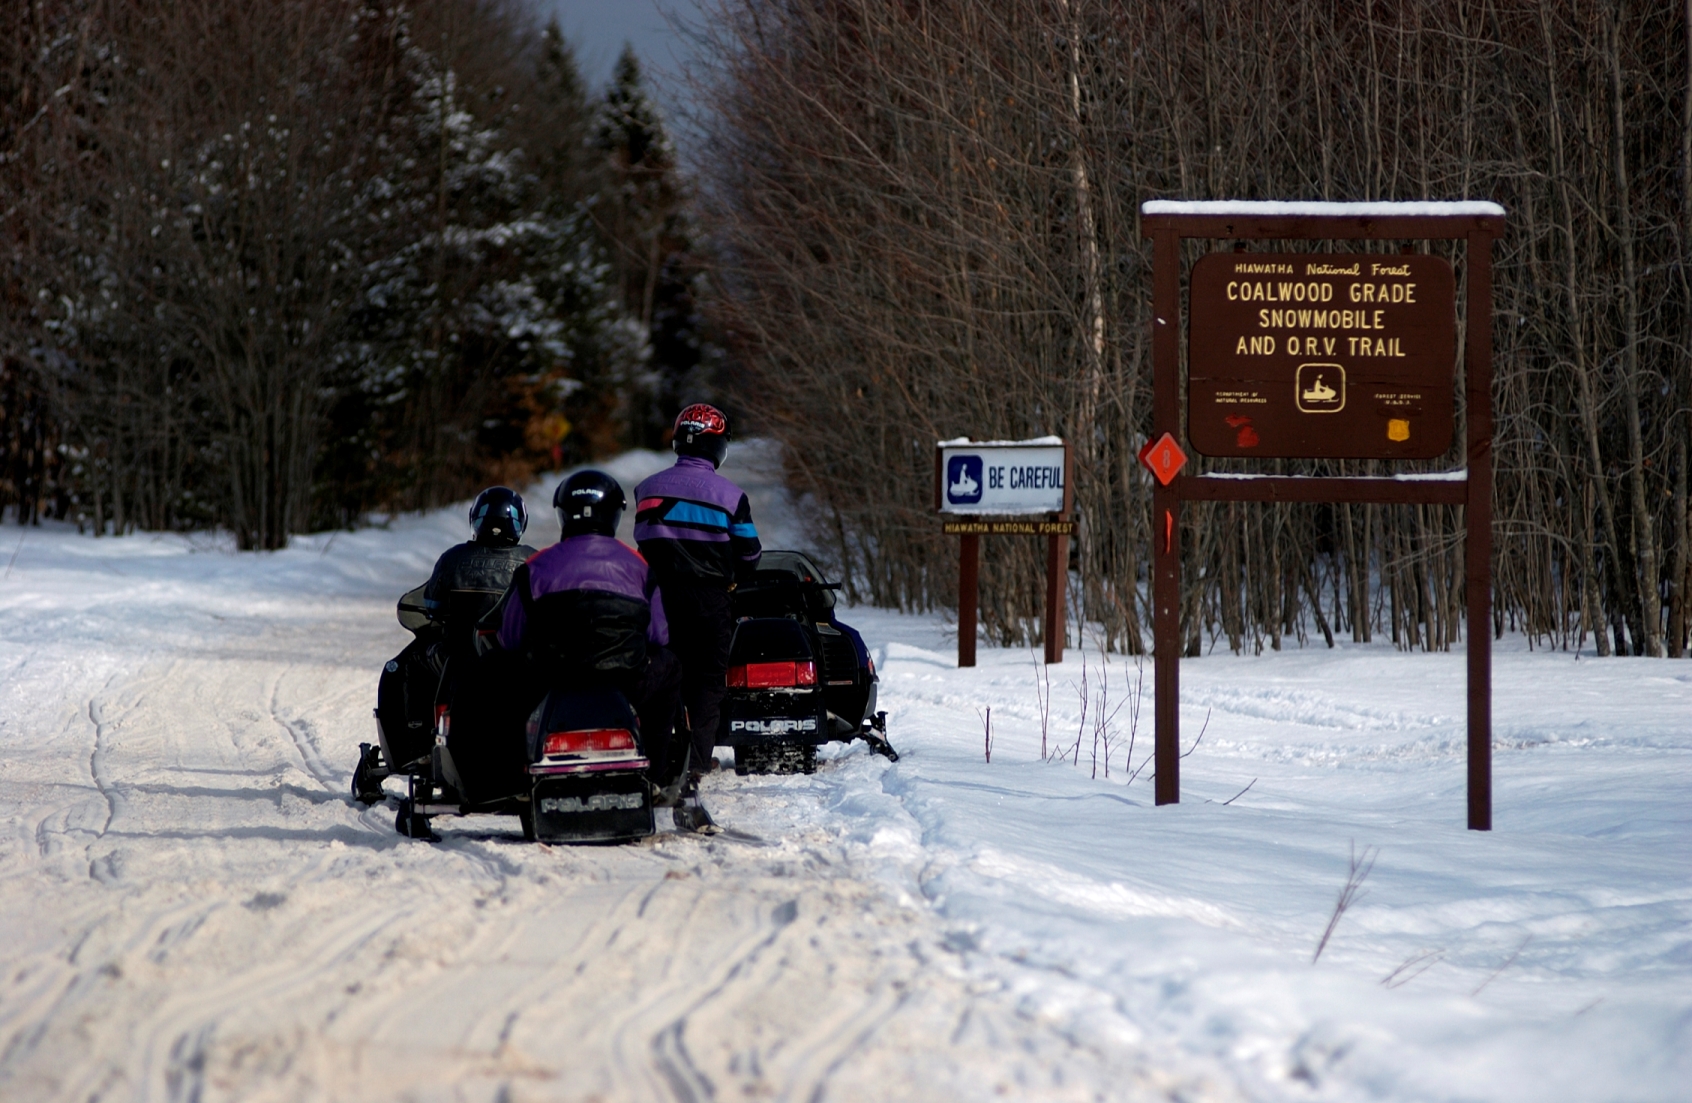 Snowmobilers in the know, know Michigan is where to go.